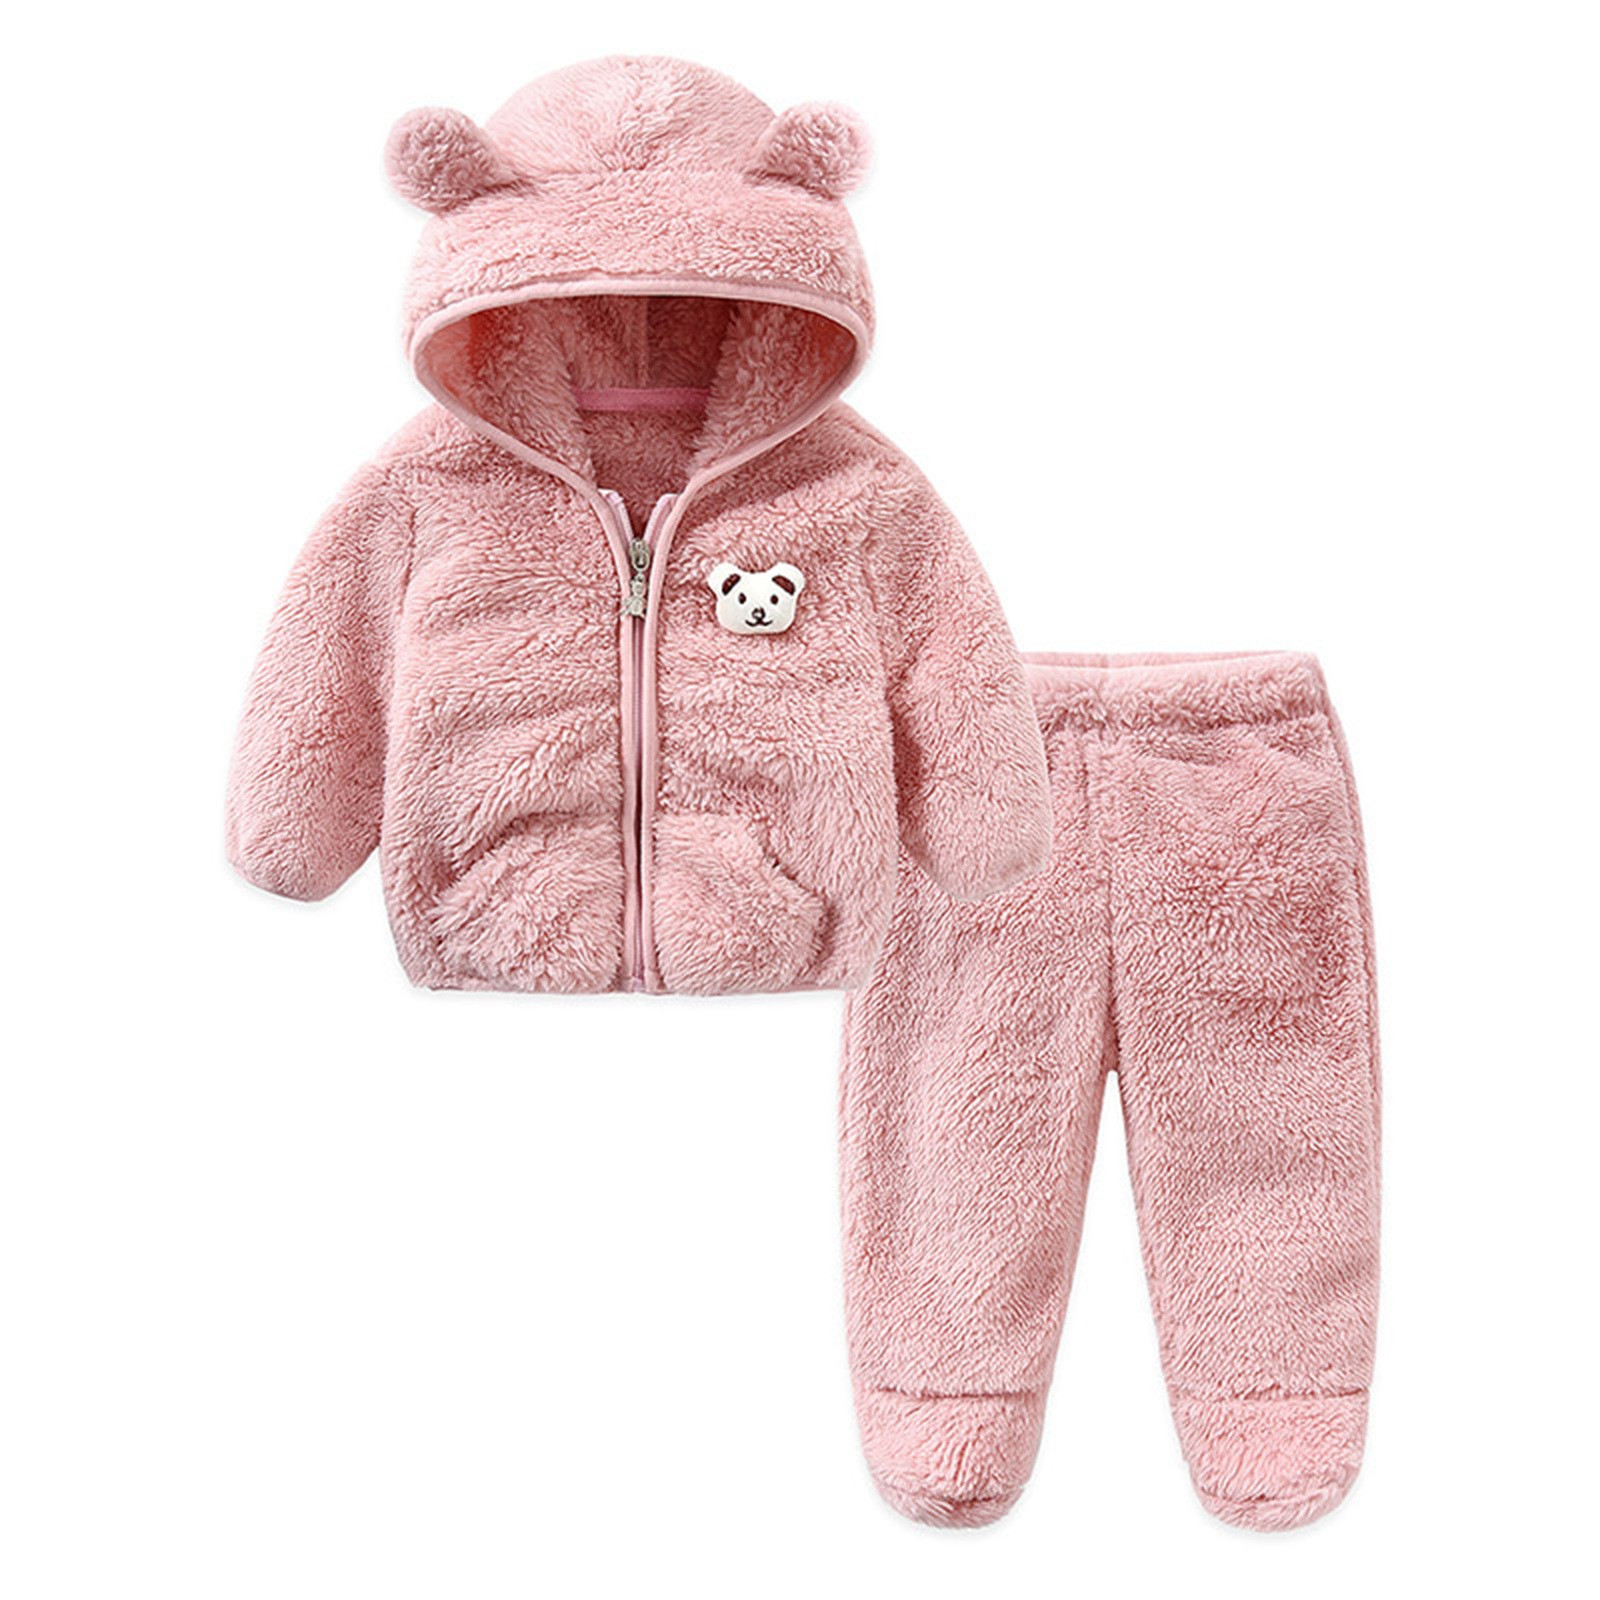 Dinosaur Jacket Toddler Baby Boy Girl Jacket Winter Clothes Hooded Coat Tops With Bear Ears Pants Sweater 2PCS Outfits Set Wool Trench Coat Boys - image 1 of 9